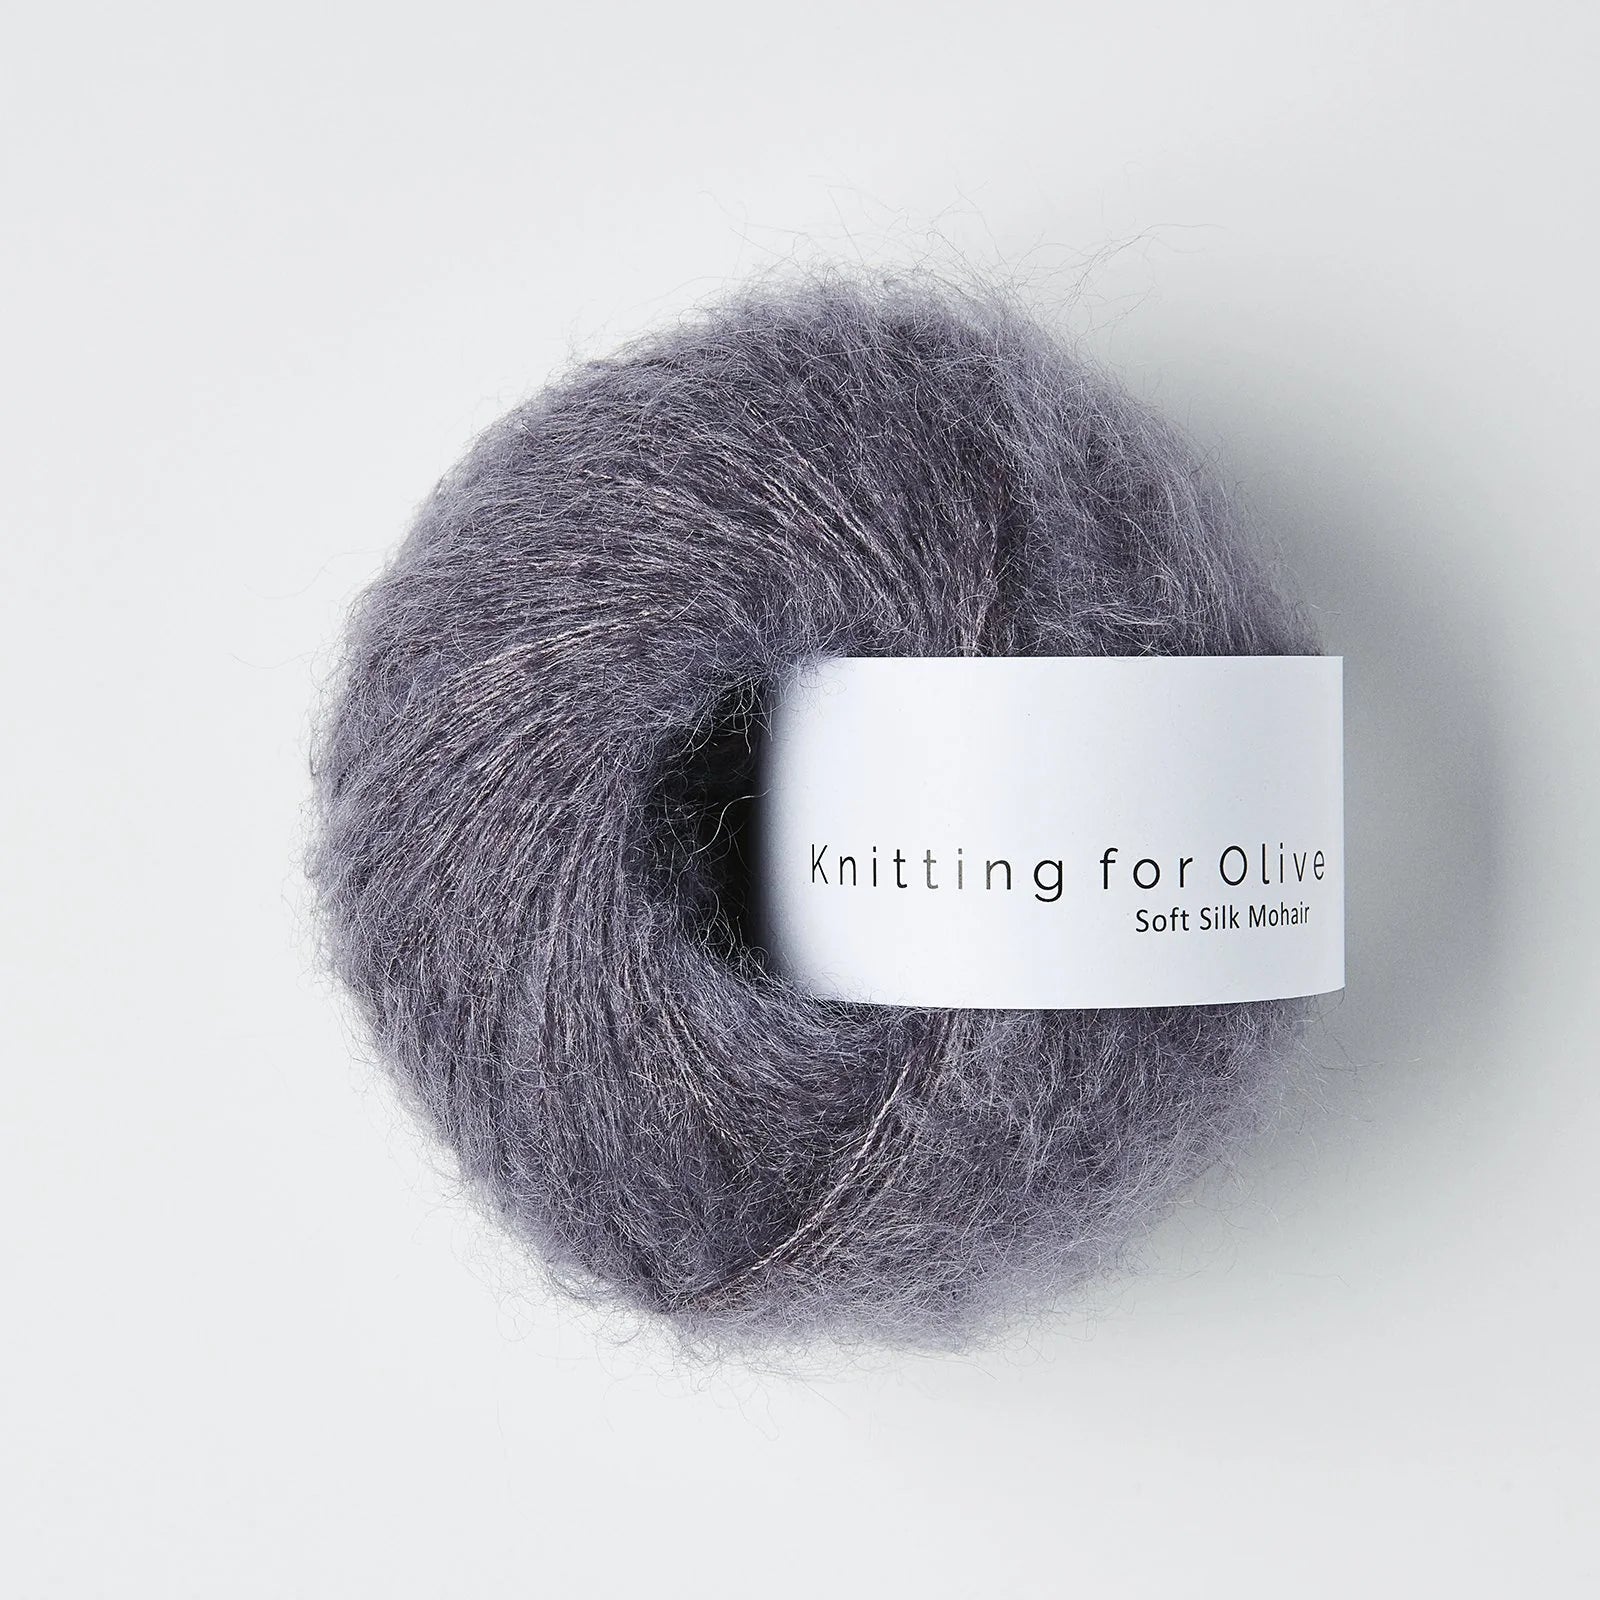 Knitting for Olive Soft Silk Mohair - Knitting for Olive - Dusty Violette - The Little Yarn Store